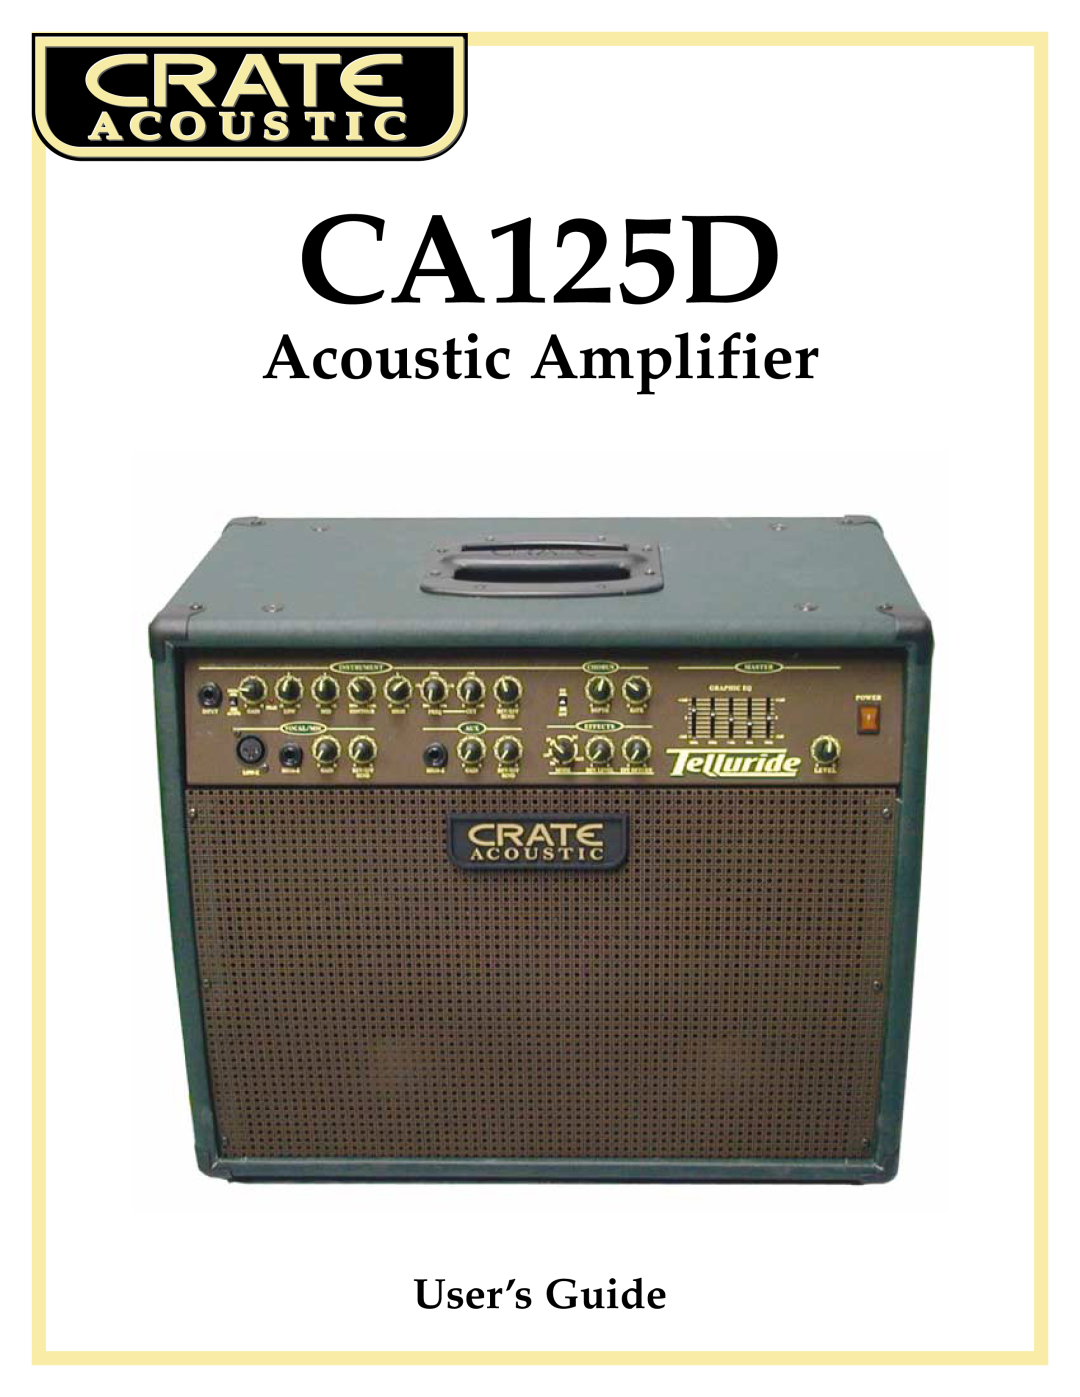 Crate Amplifiers CA125D manual Acoustic Amplifier, User’s Guide 